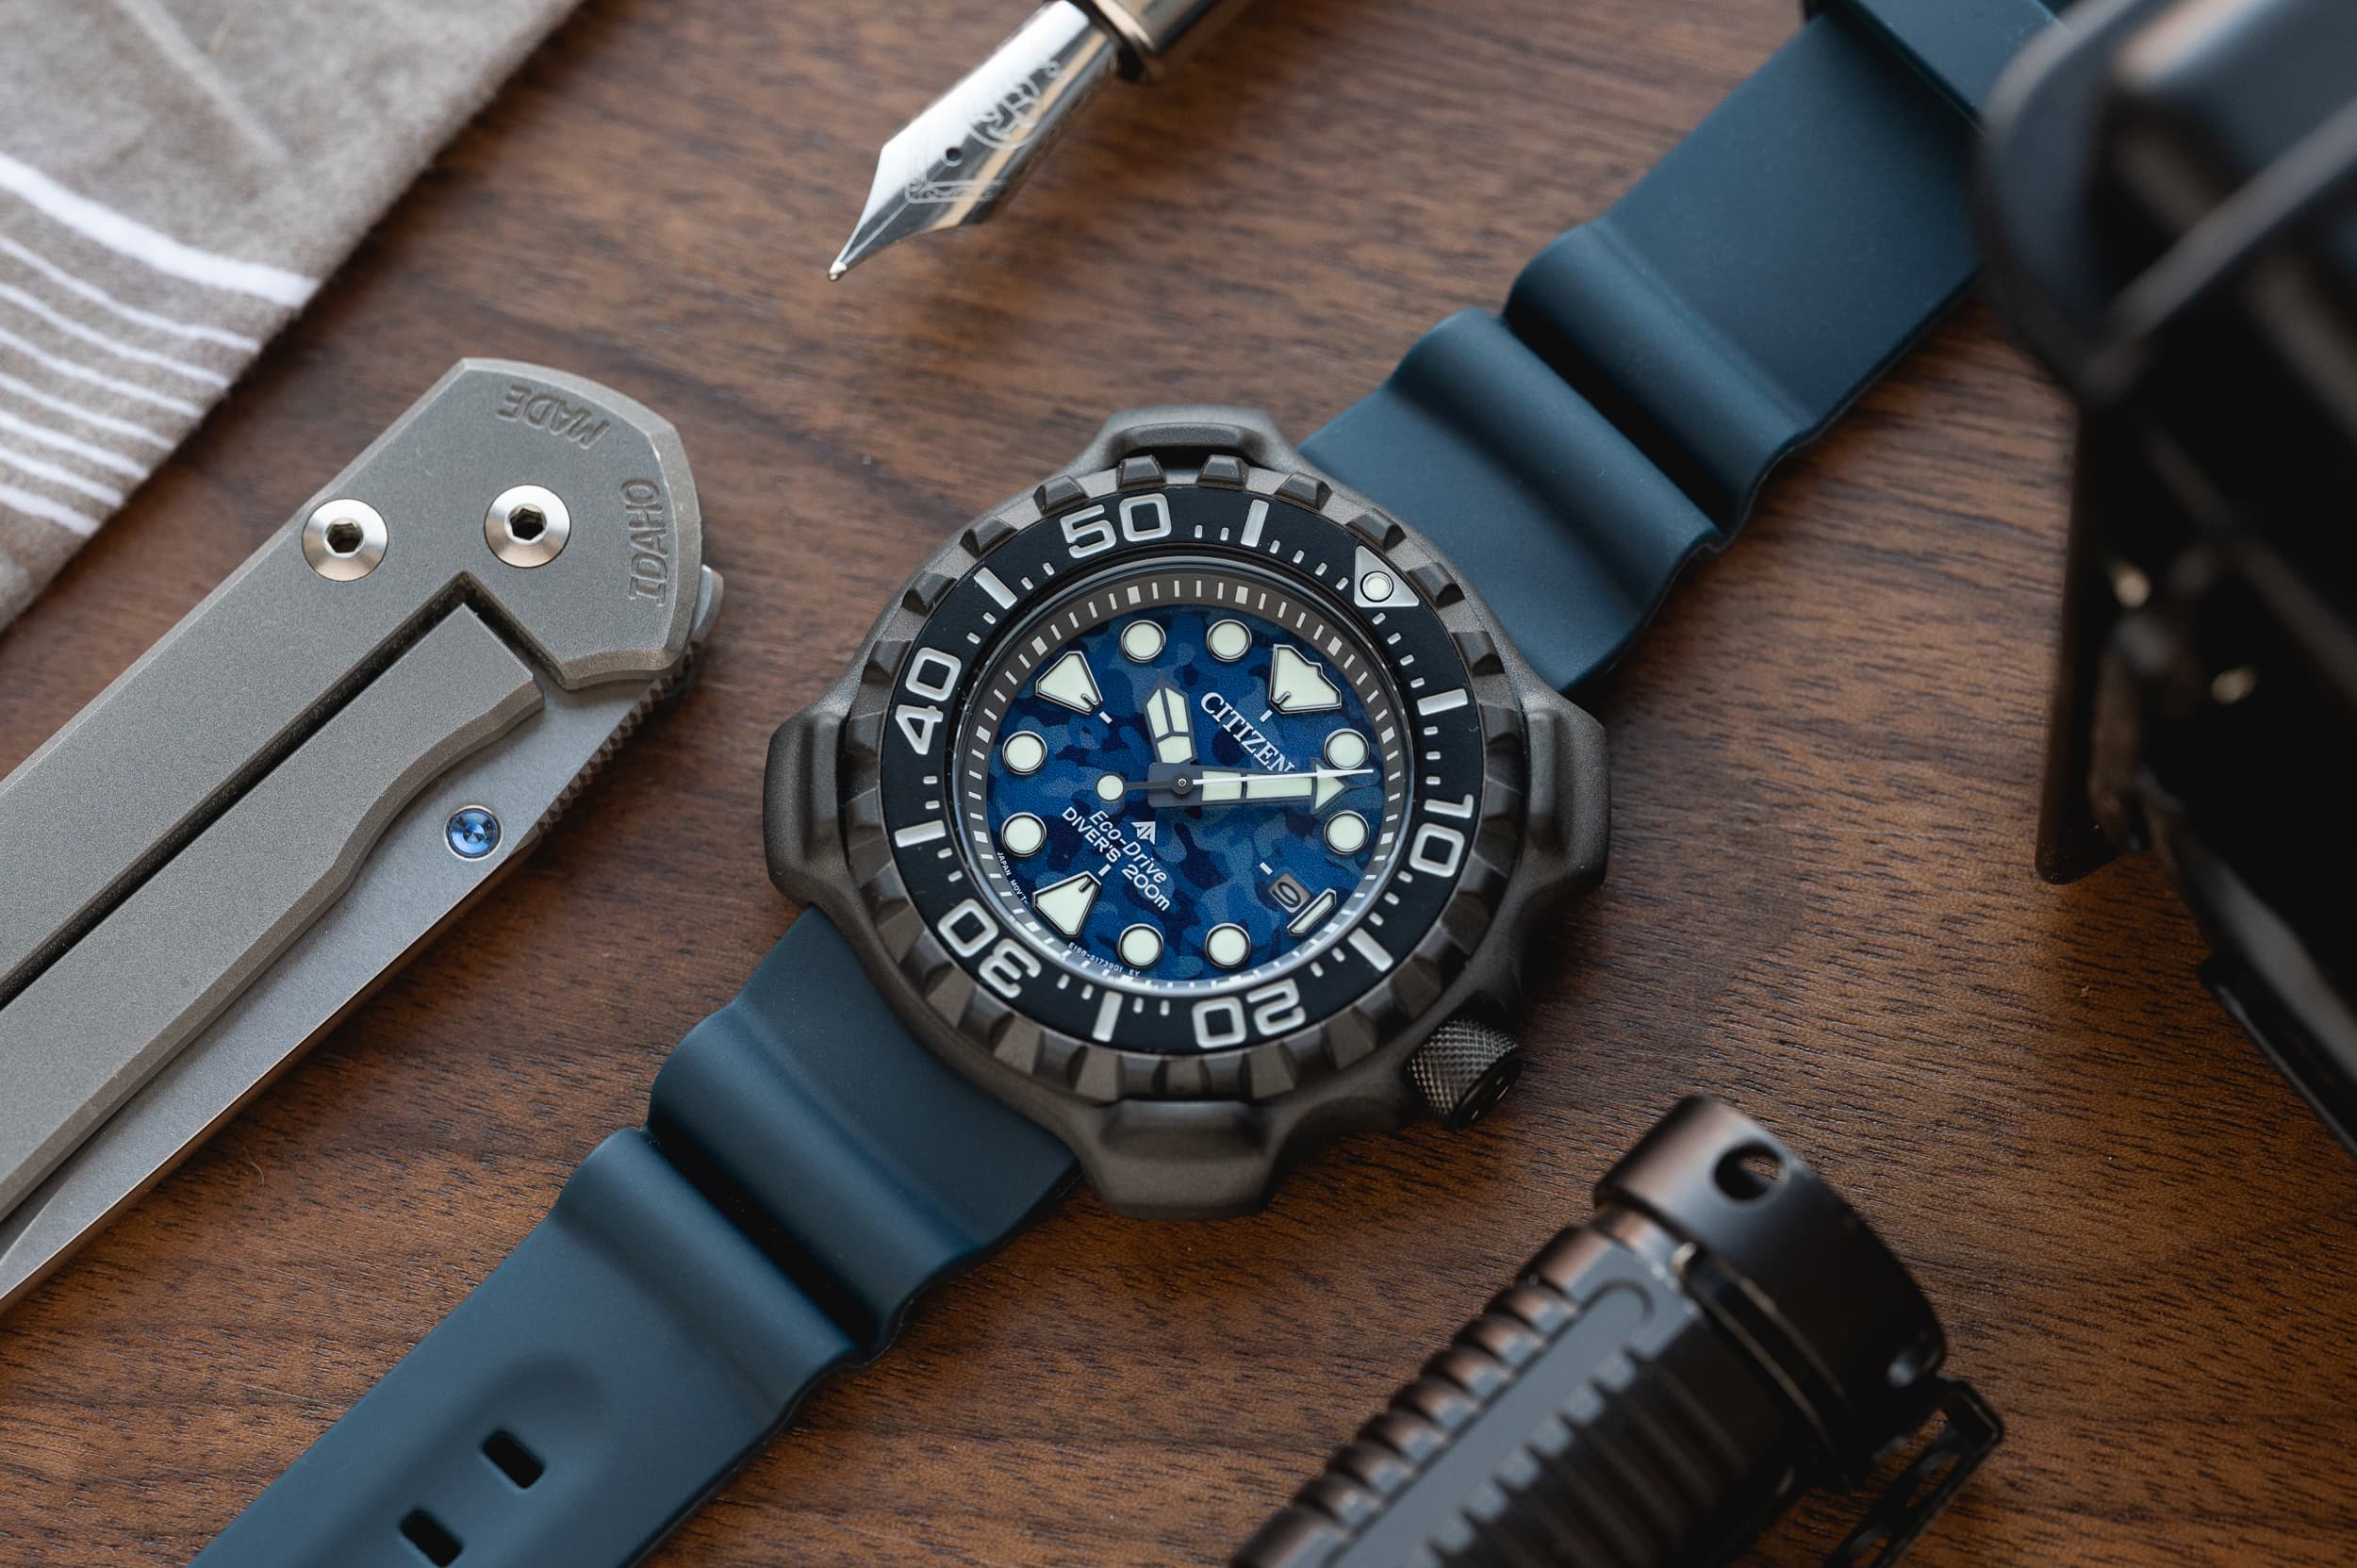 Review: The Assertive Yet - Promaster Worn Approachable & Wound Citizen Diver BN0227-09L